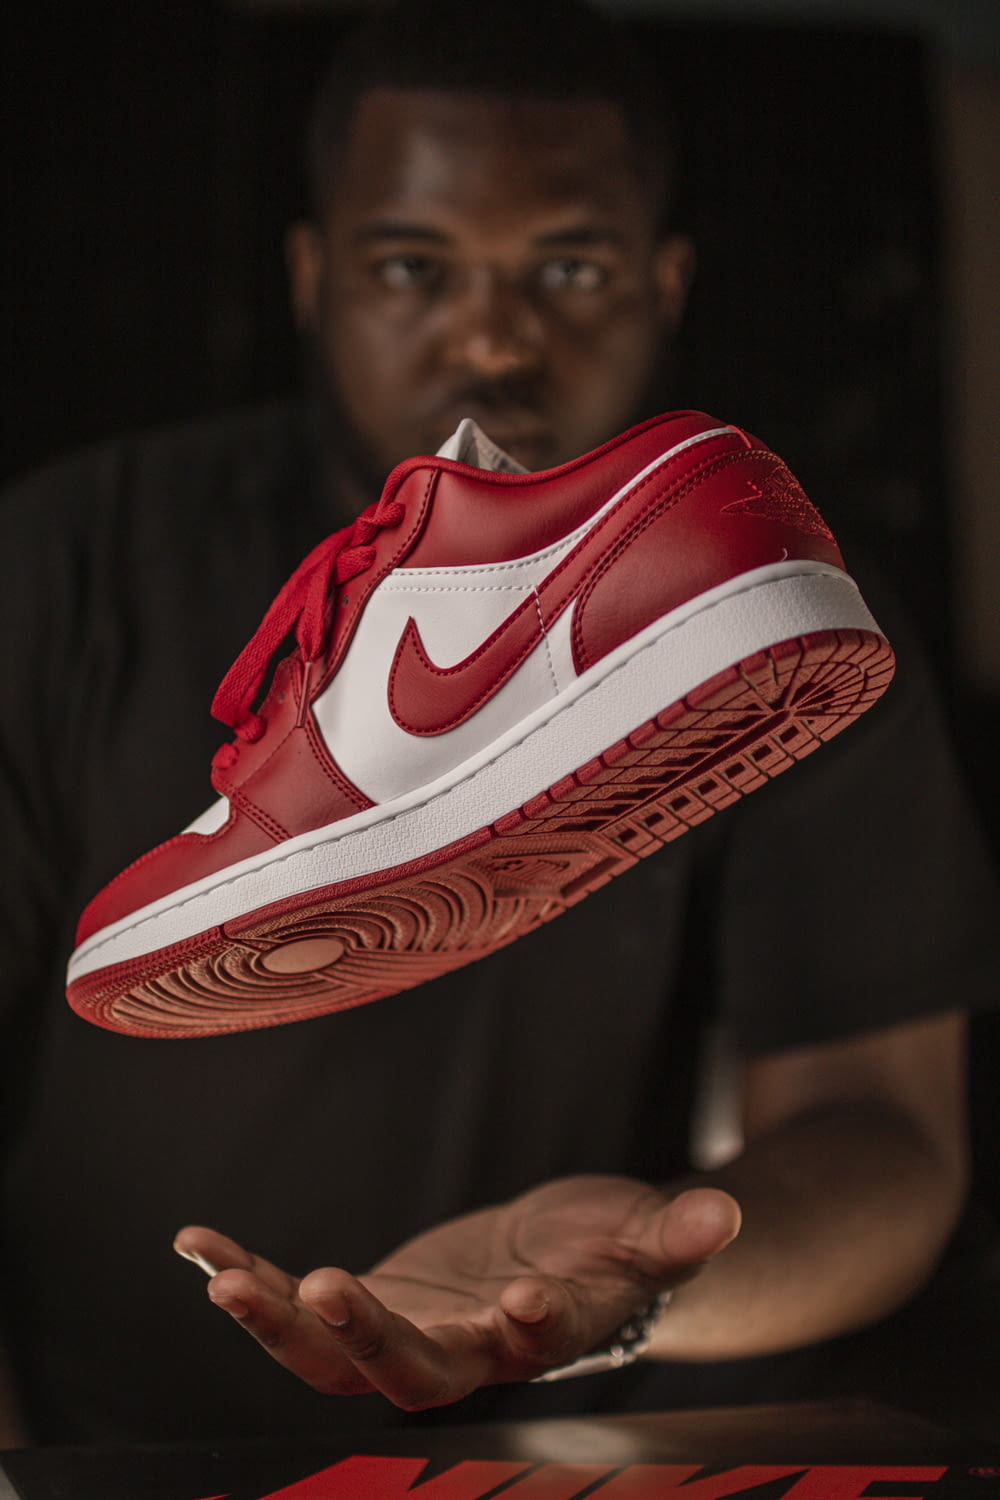 red and white nike athletic shoe